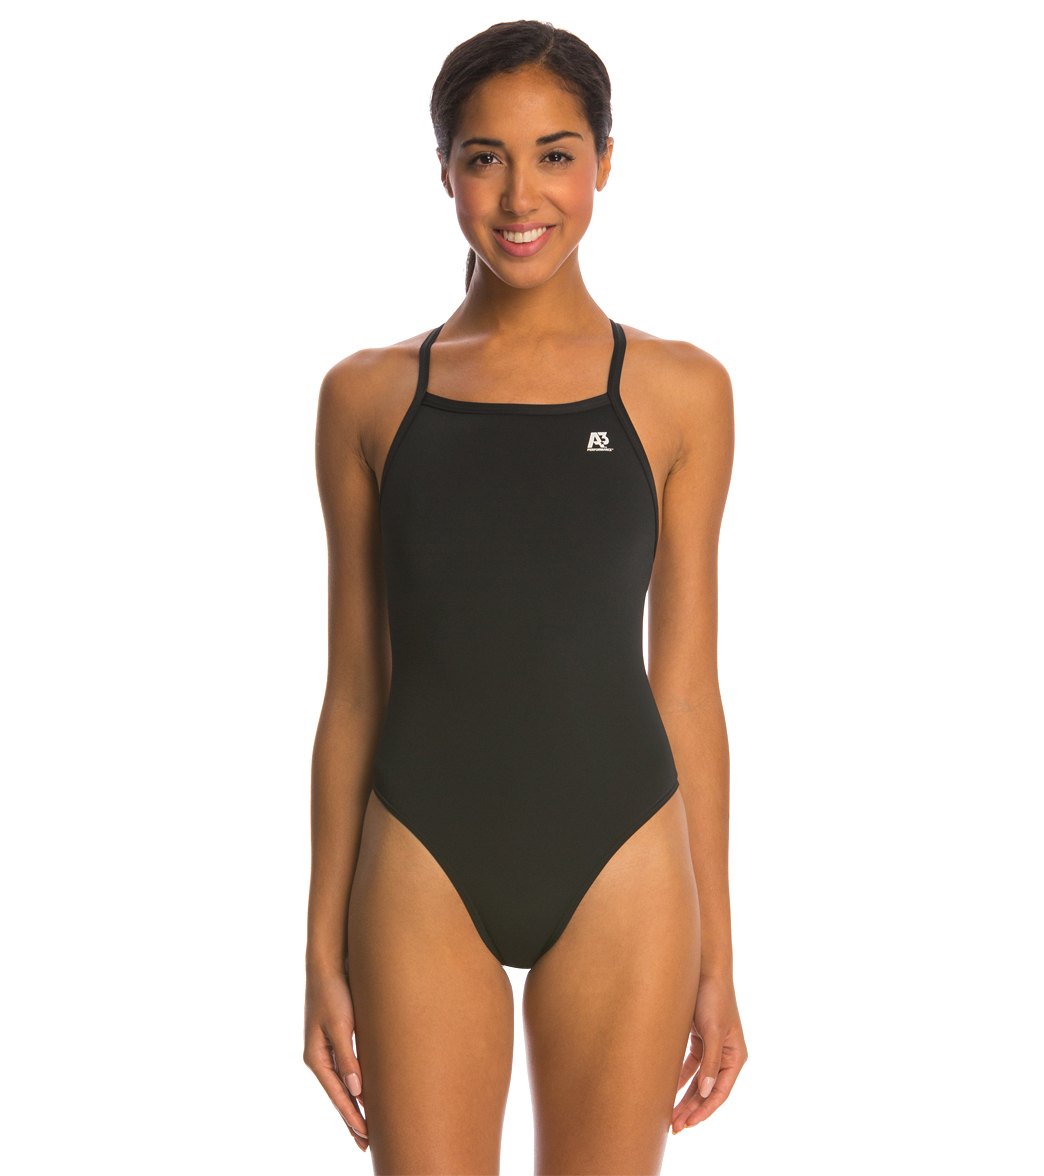 A3 Performance Female X-Back Solid Poly One Piece Swimsuit